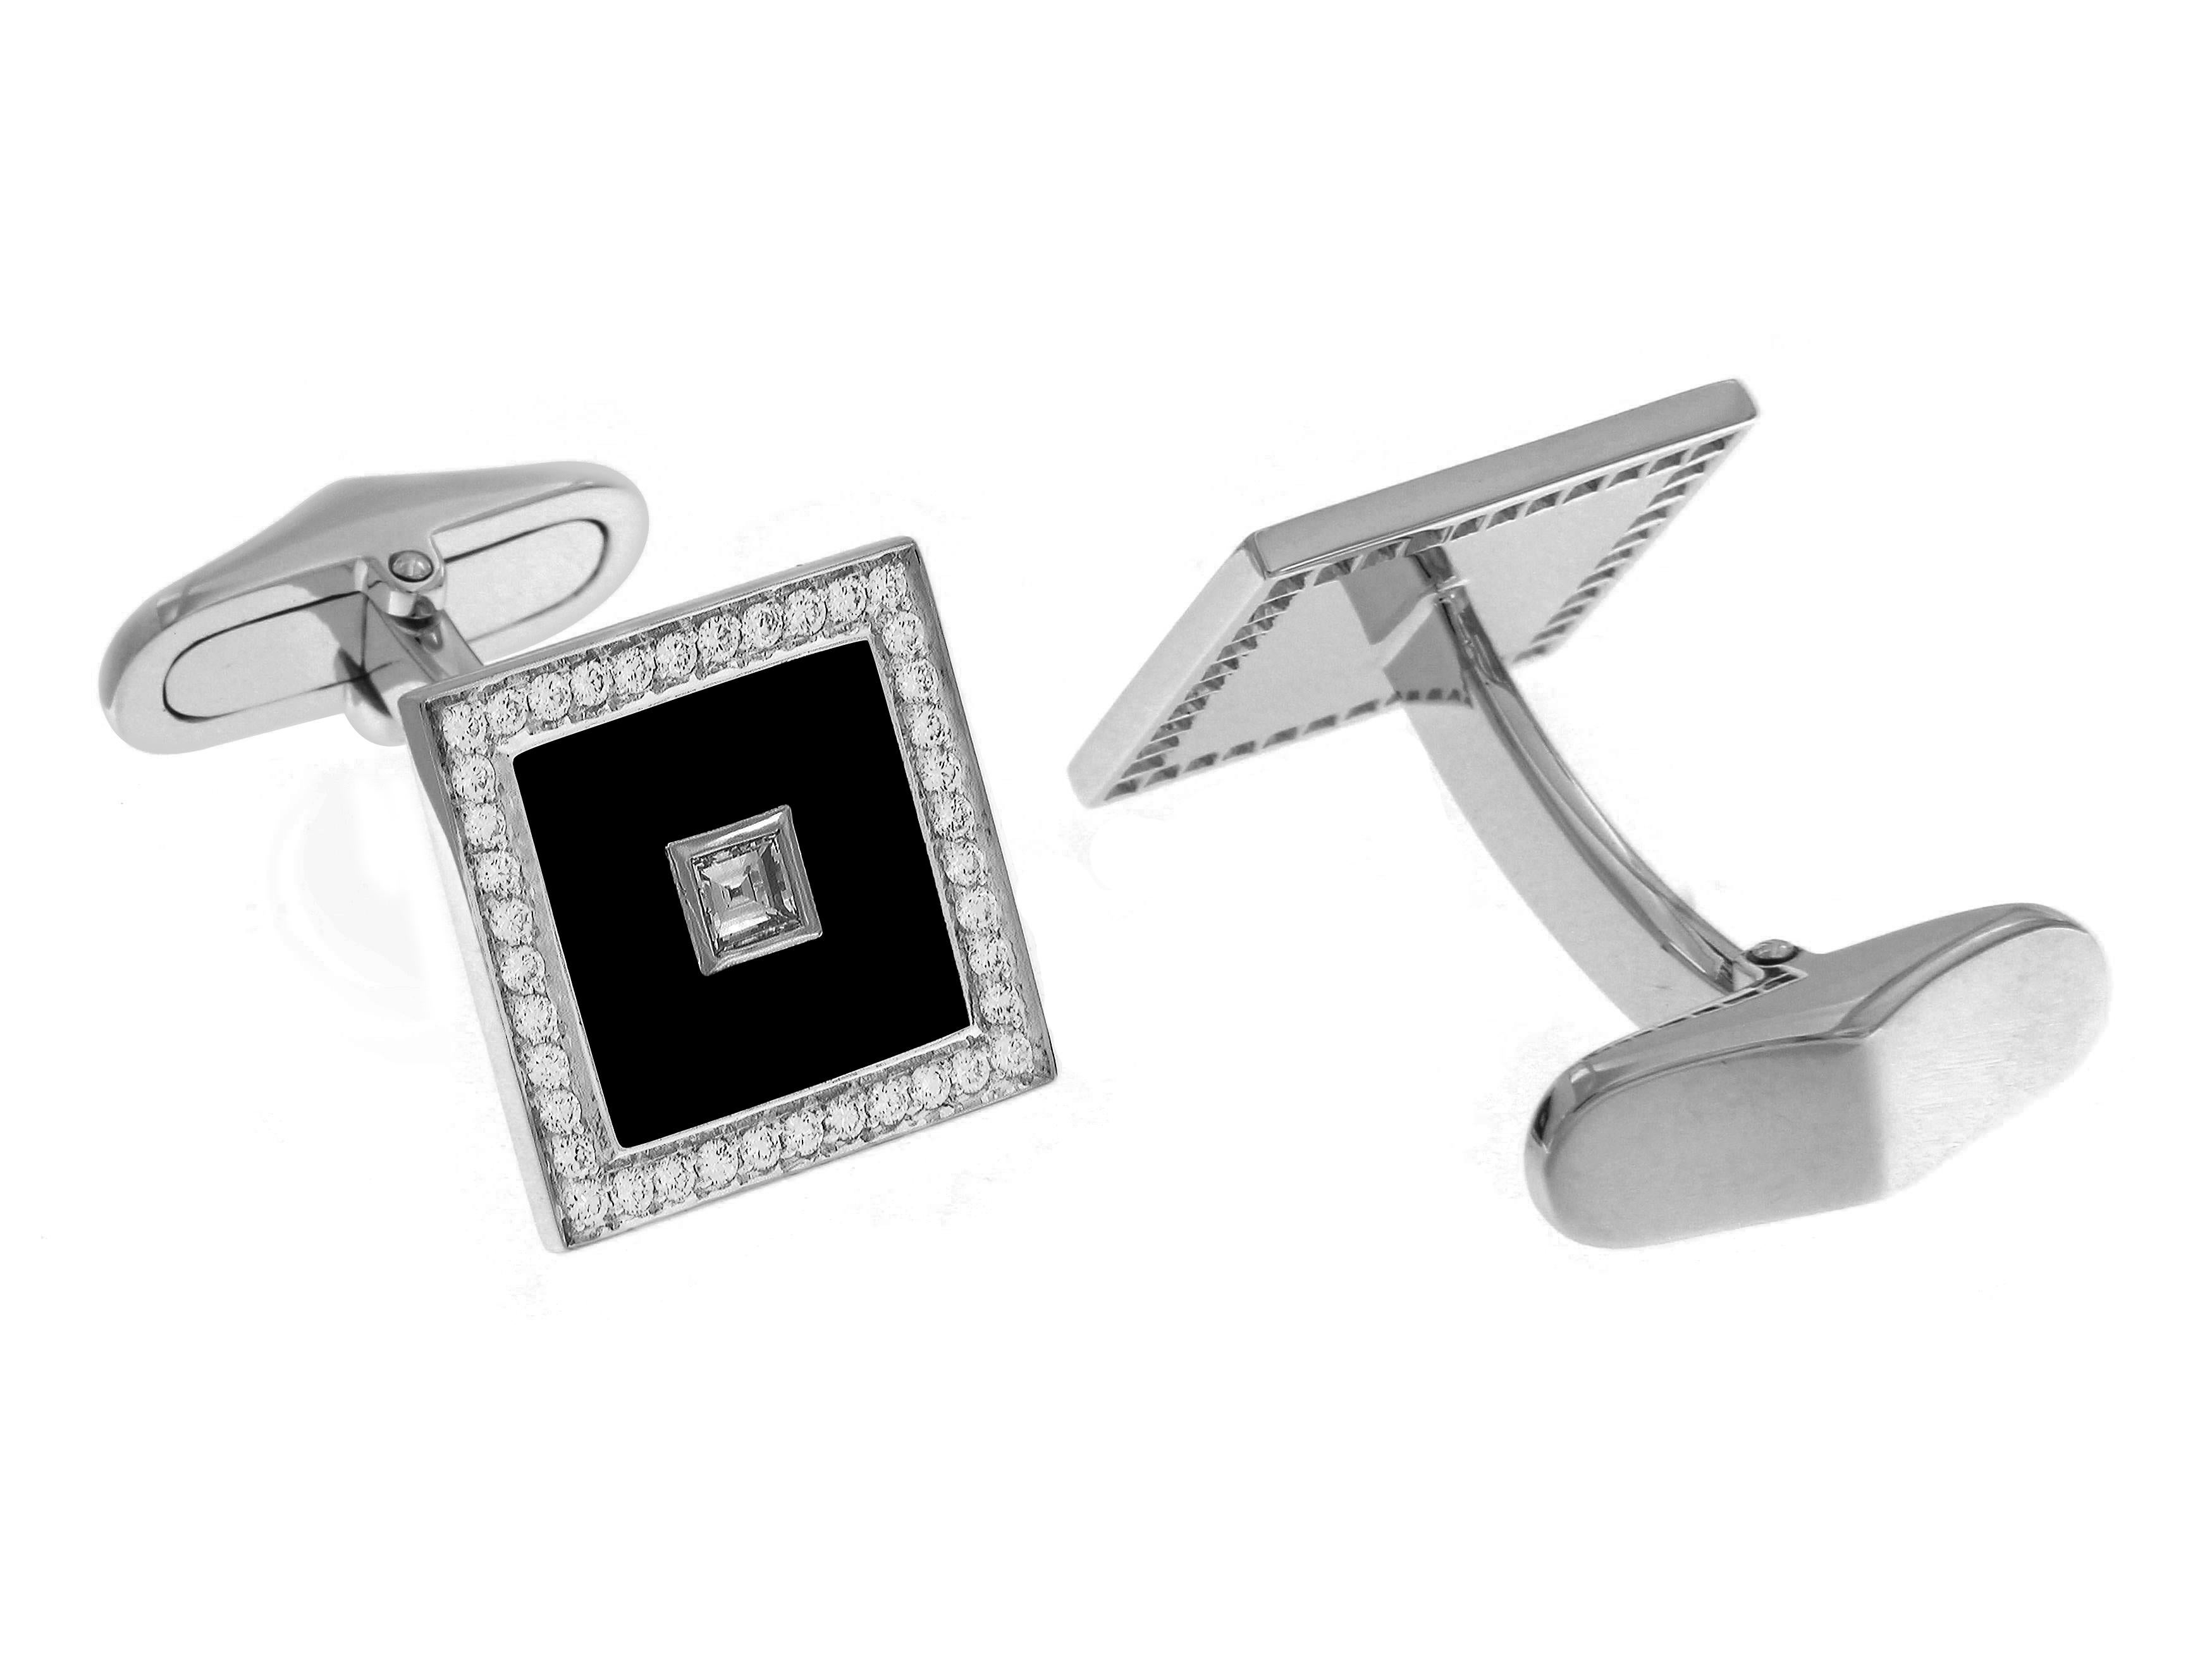 Every worldly gentleman needs a pair of sophiscated cufflinks. These 18k white gold cufflinks feature square diamonds surrounded by black enamel. Pave'd diamonds are set around the enamel for the finishing touch.